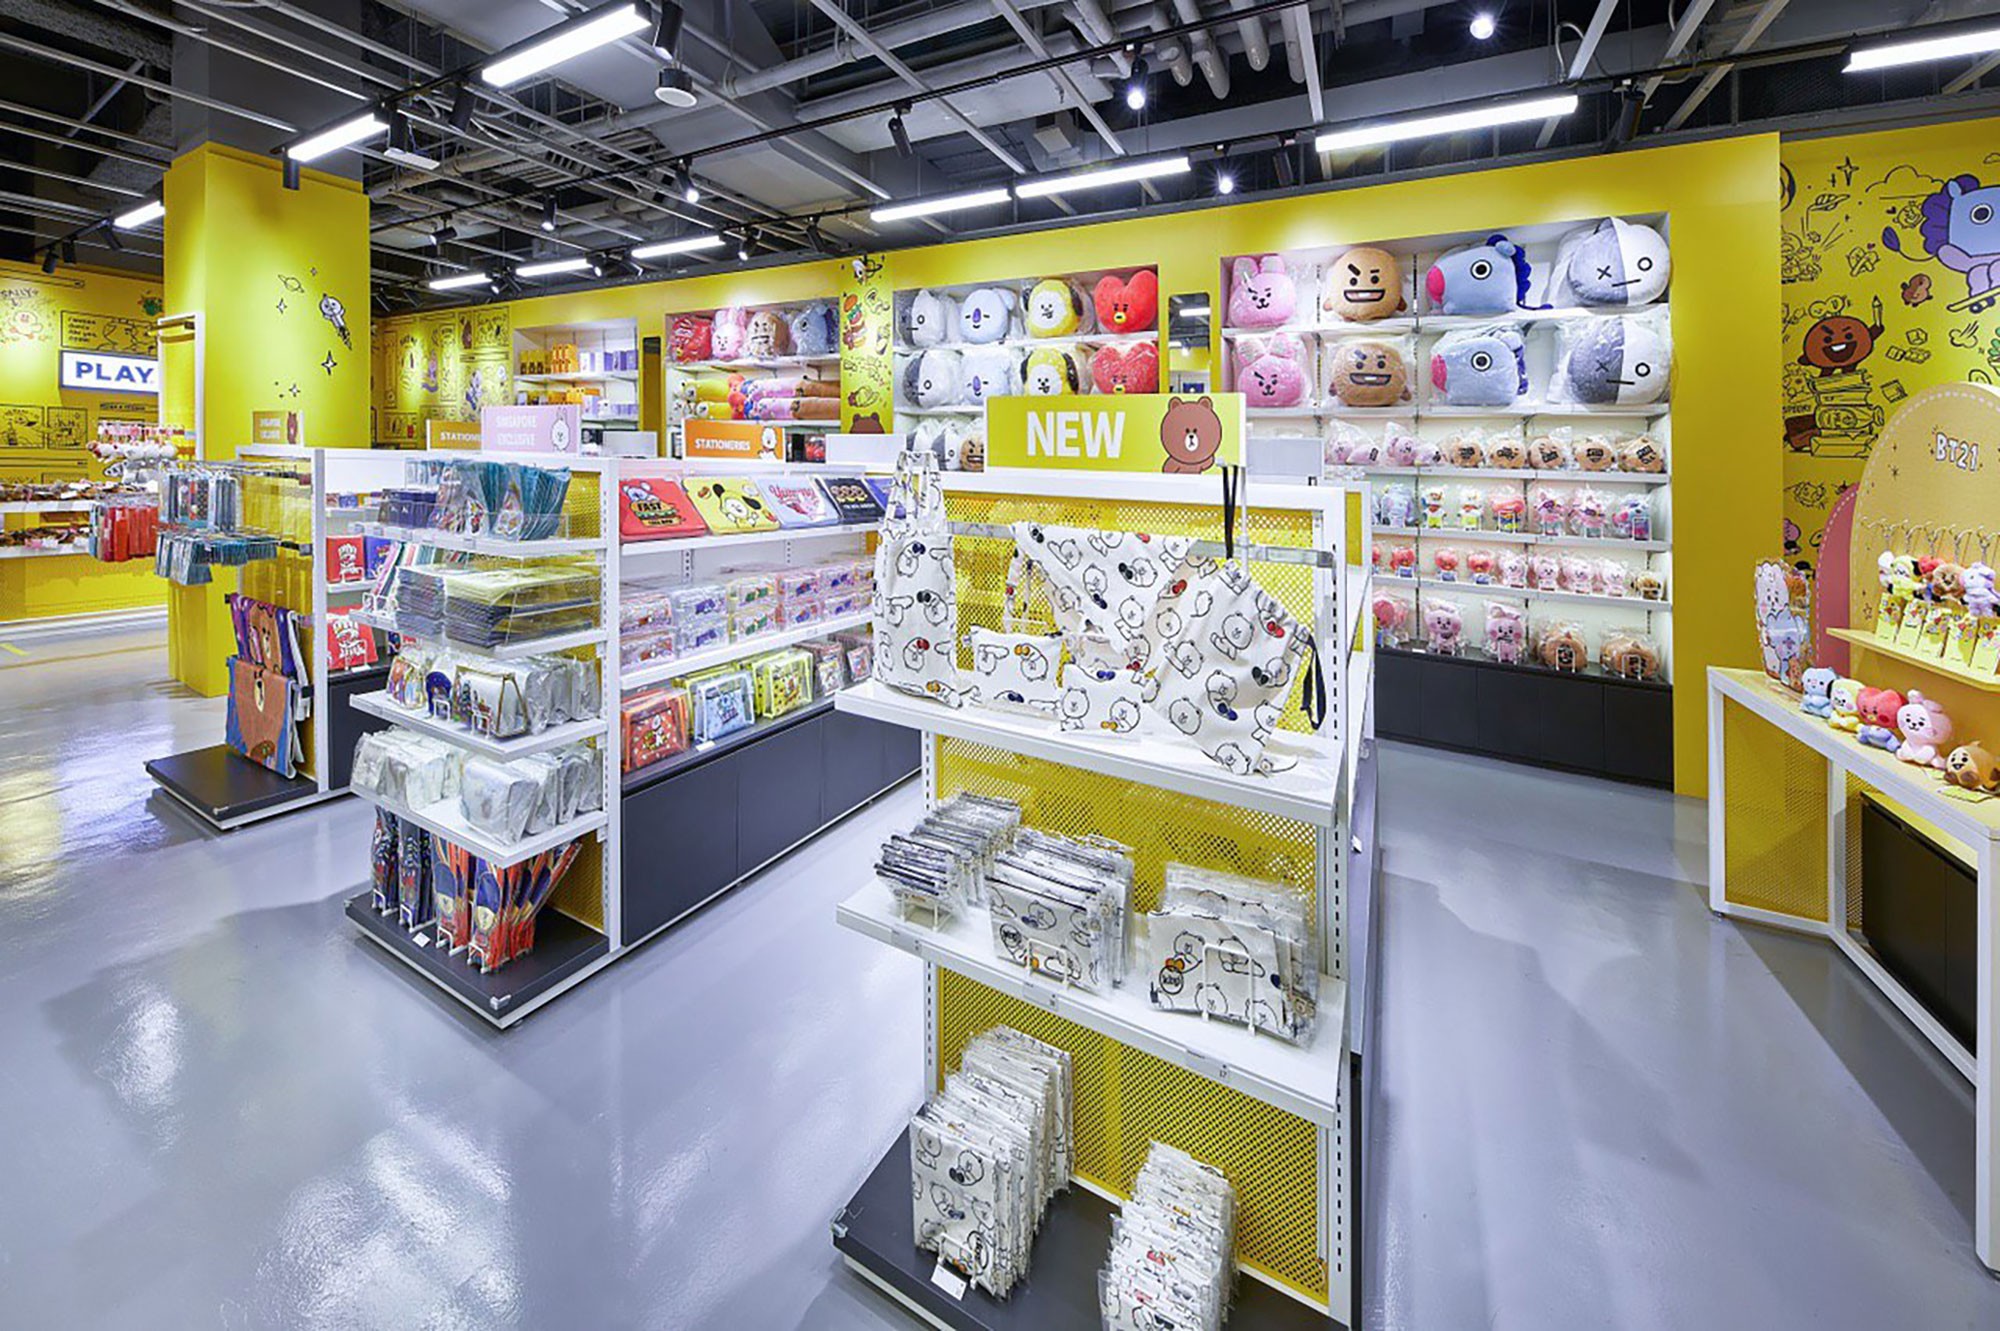 PHOTO - PLAY LINE FRIENDS FLAGSHIP STORE AT FUNAN, SINGAPORE